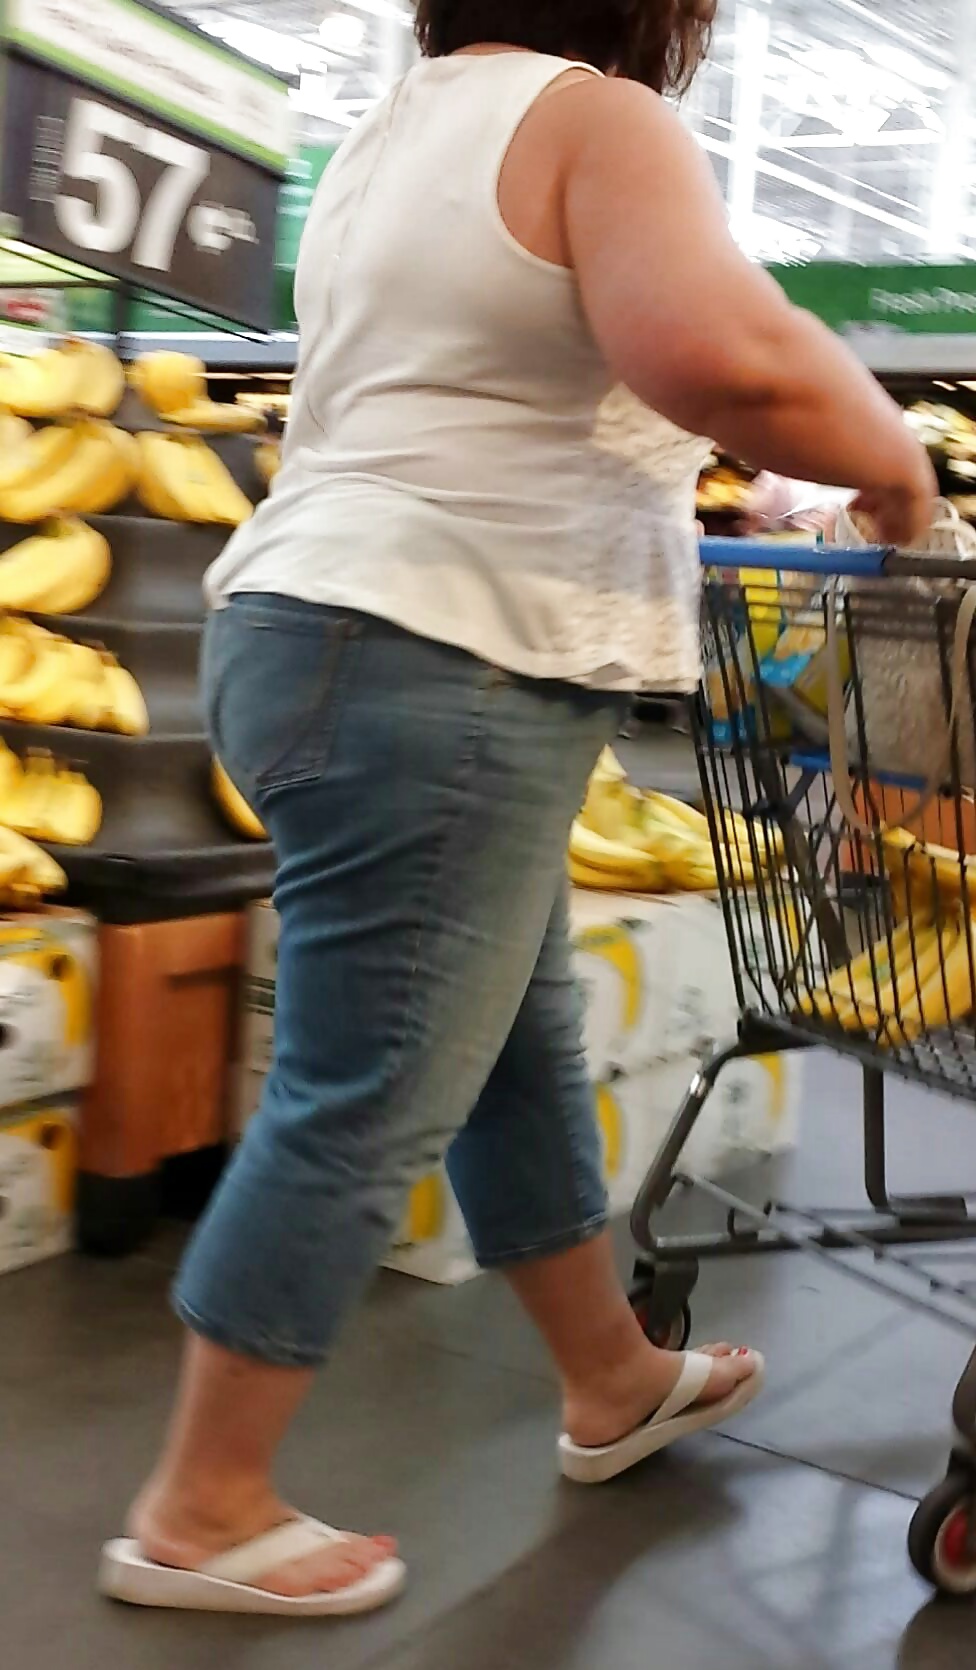 Porn Pics Public shopping candid teen and mature leg, ass and tits